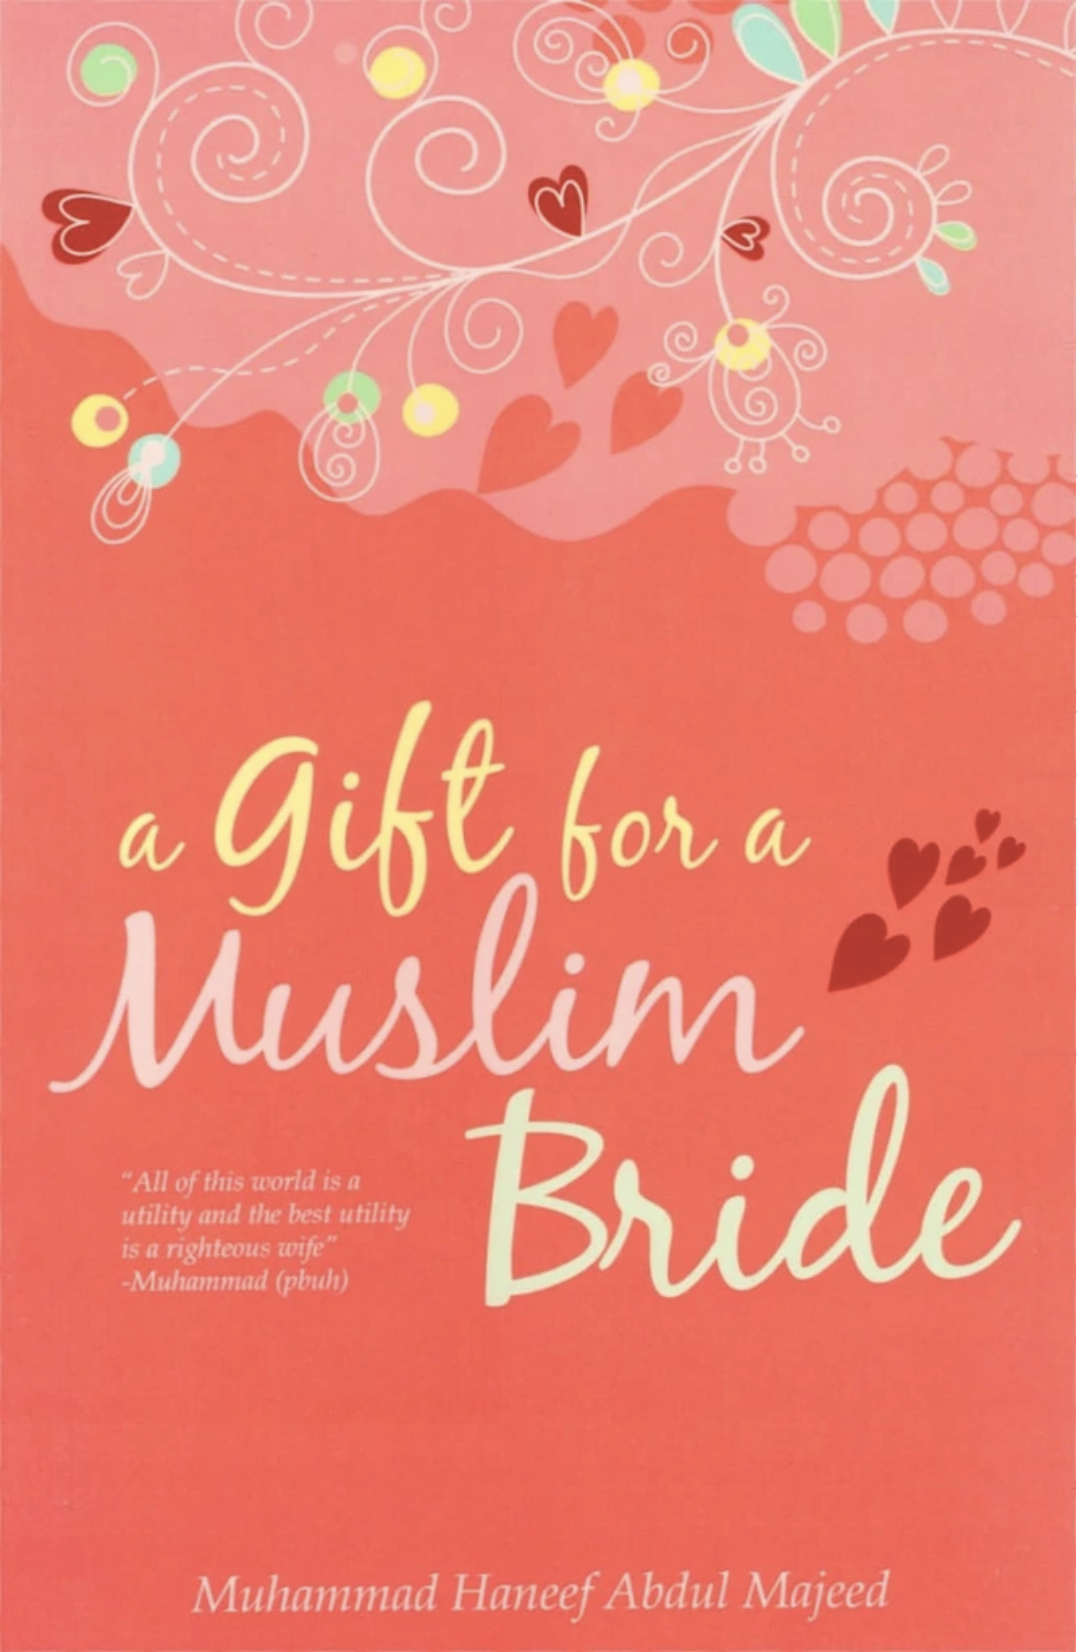 A gift for a muslim bride